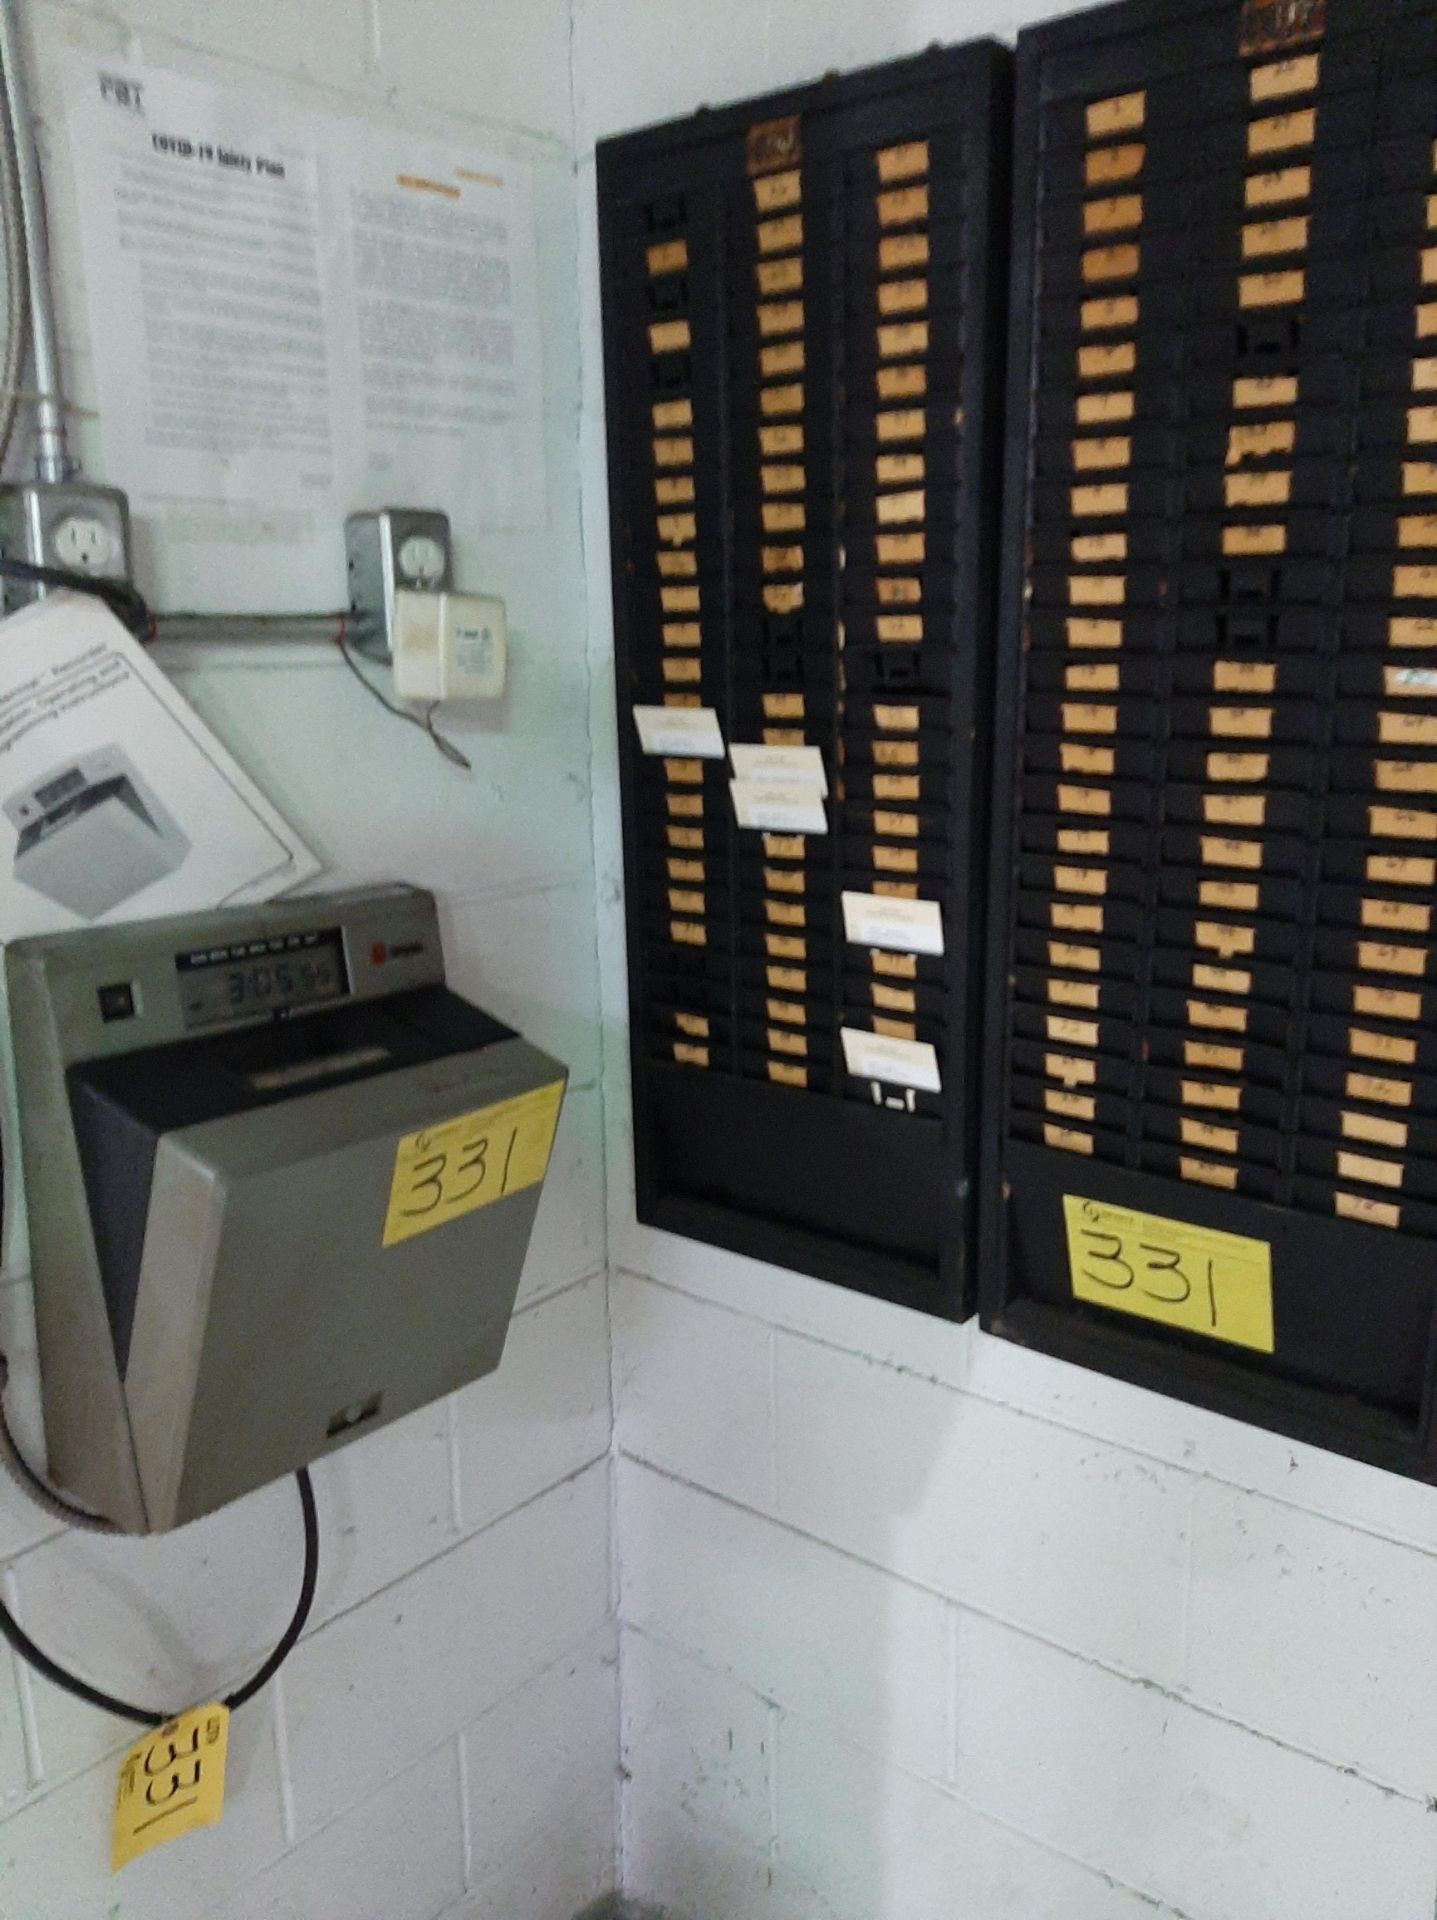 SIMPLEX GRINNELL TIME CLOCK AND TIME CARD RACKS